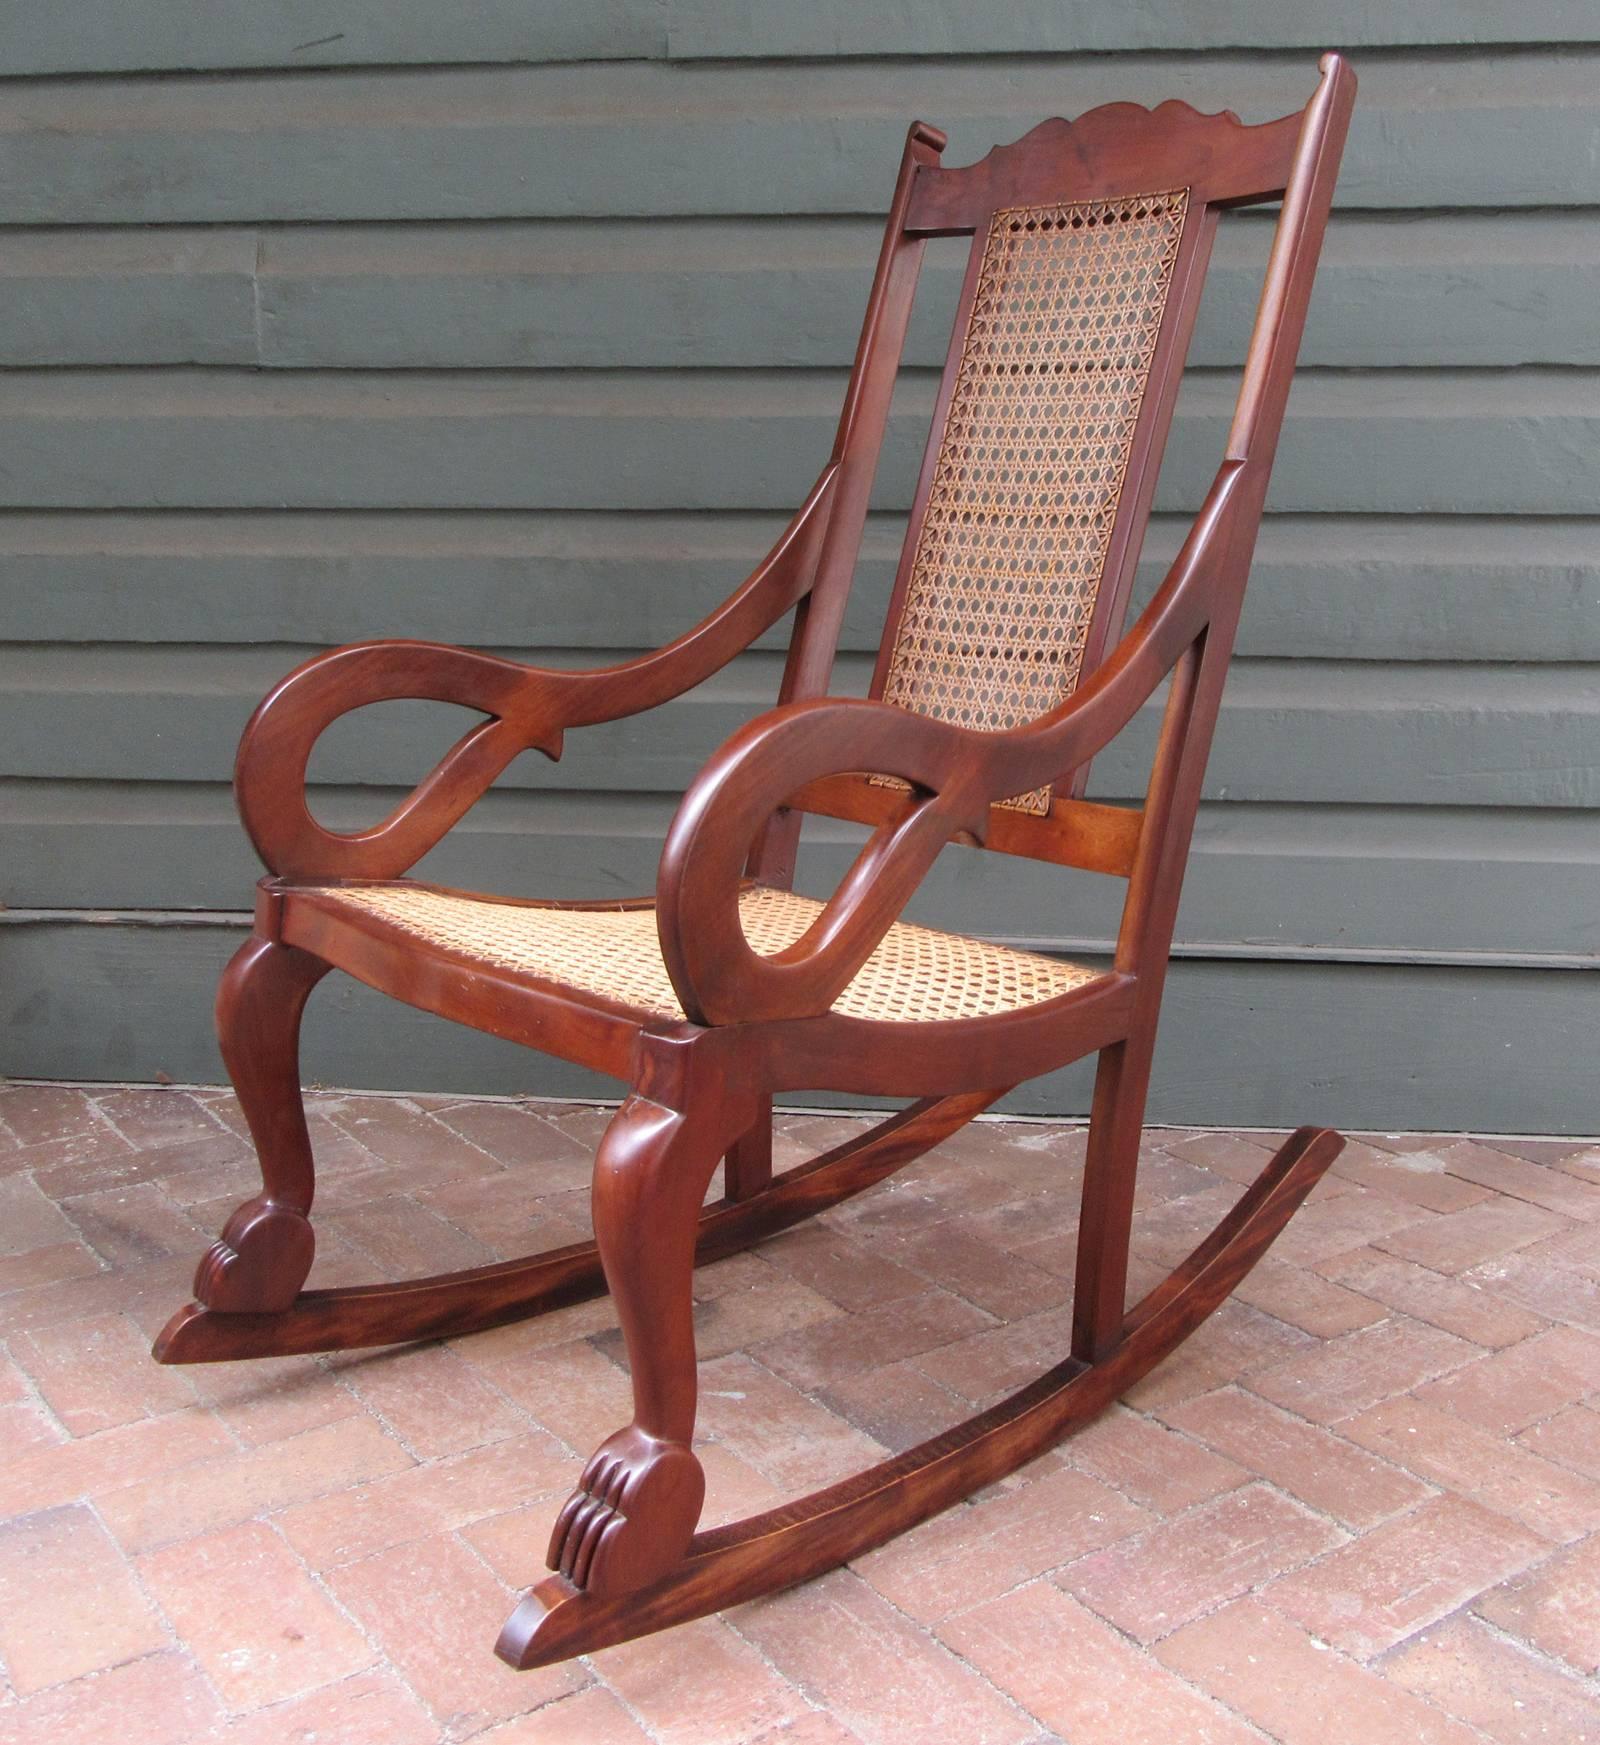 Hand-Carved Early 19th Century Caribbean Regency Mahogany and Cane Rocking Chair For Sale